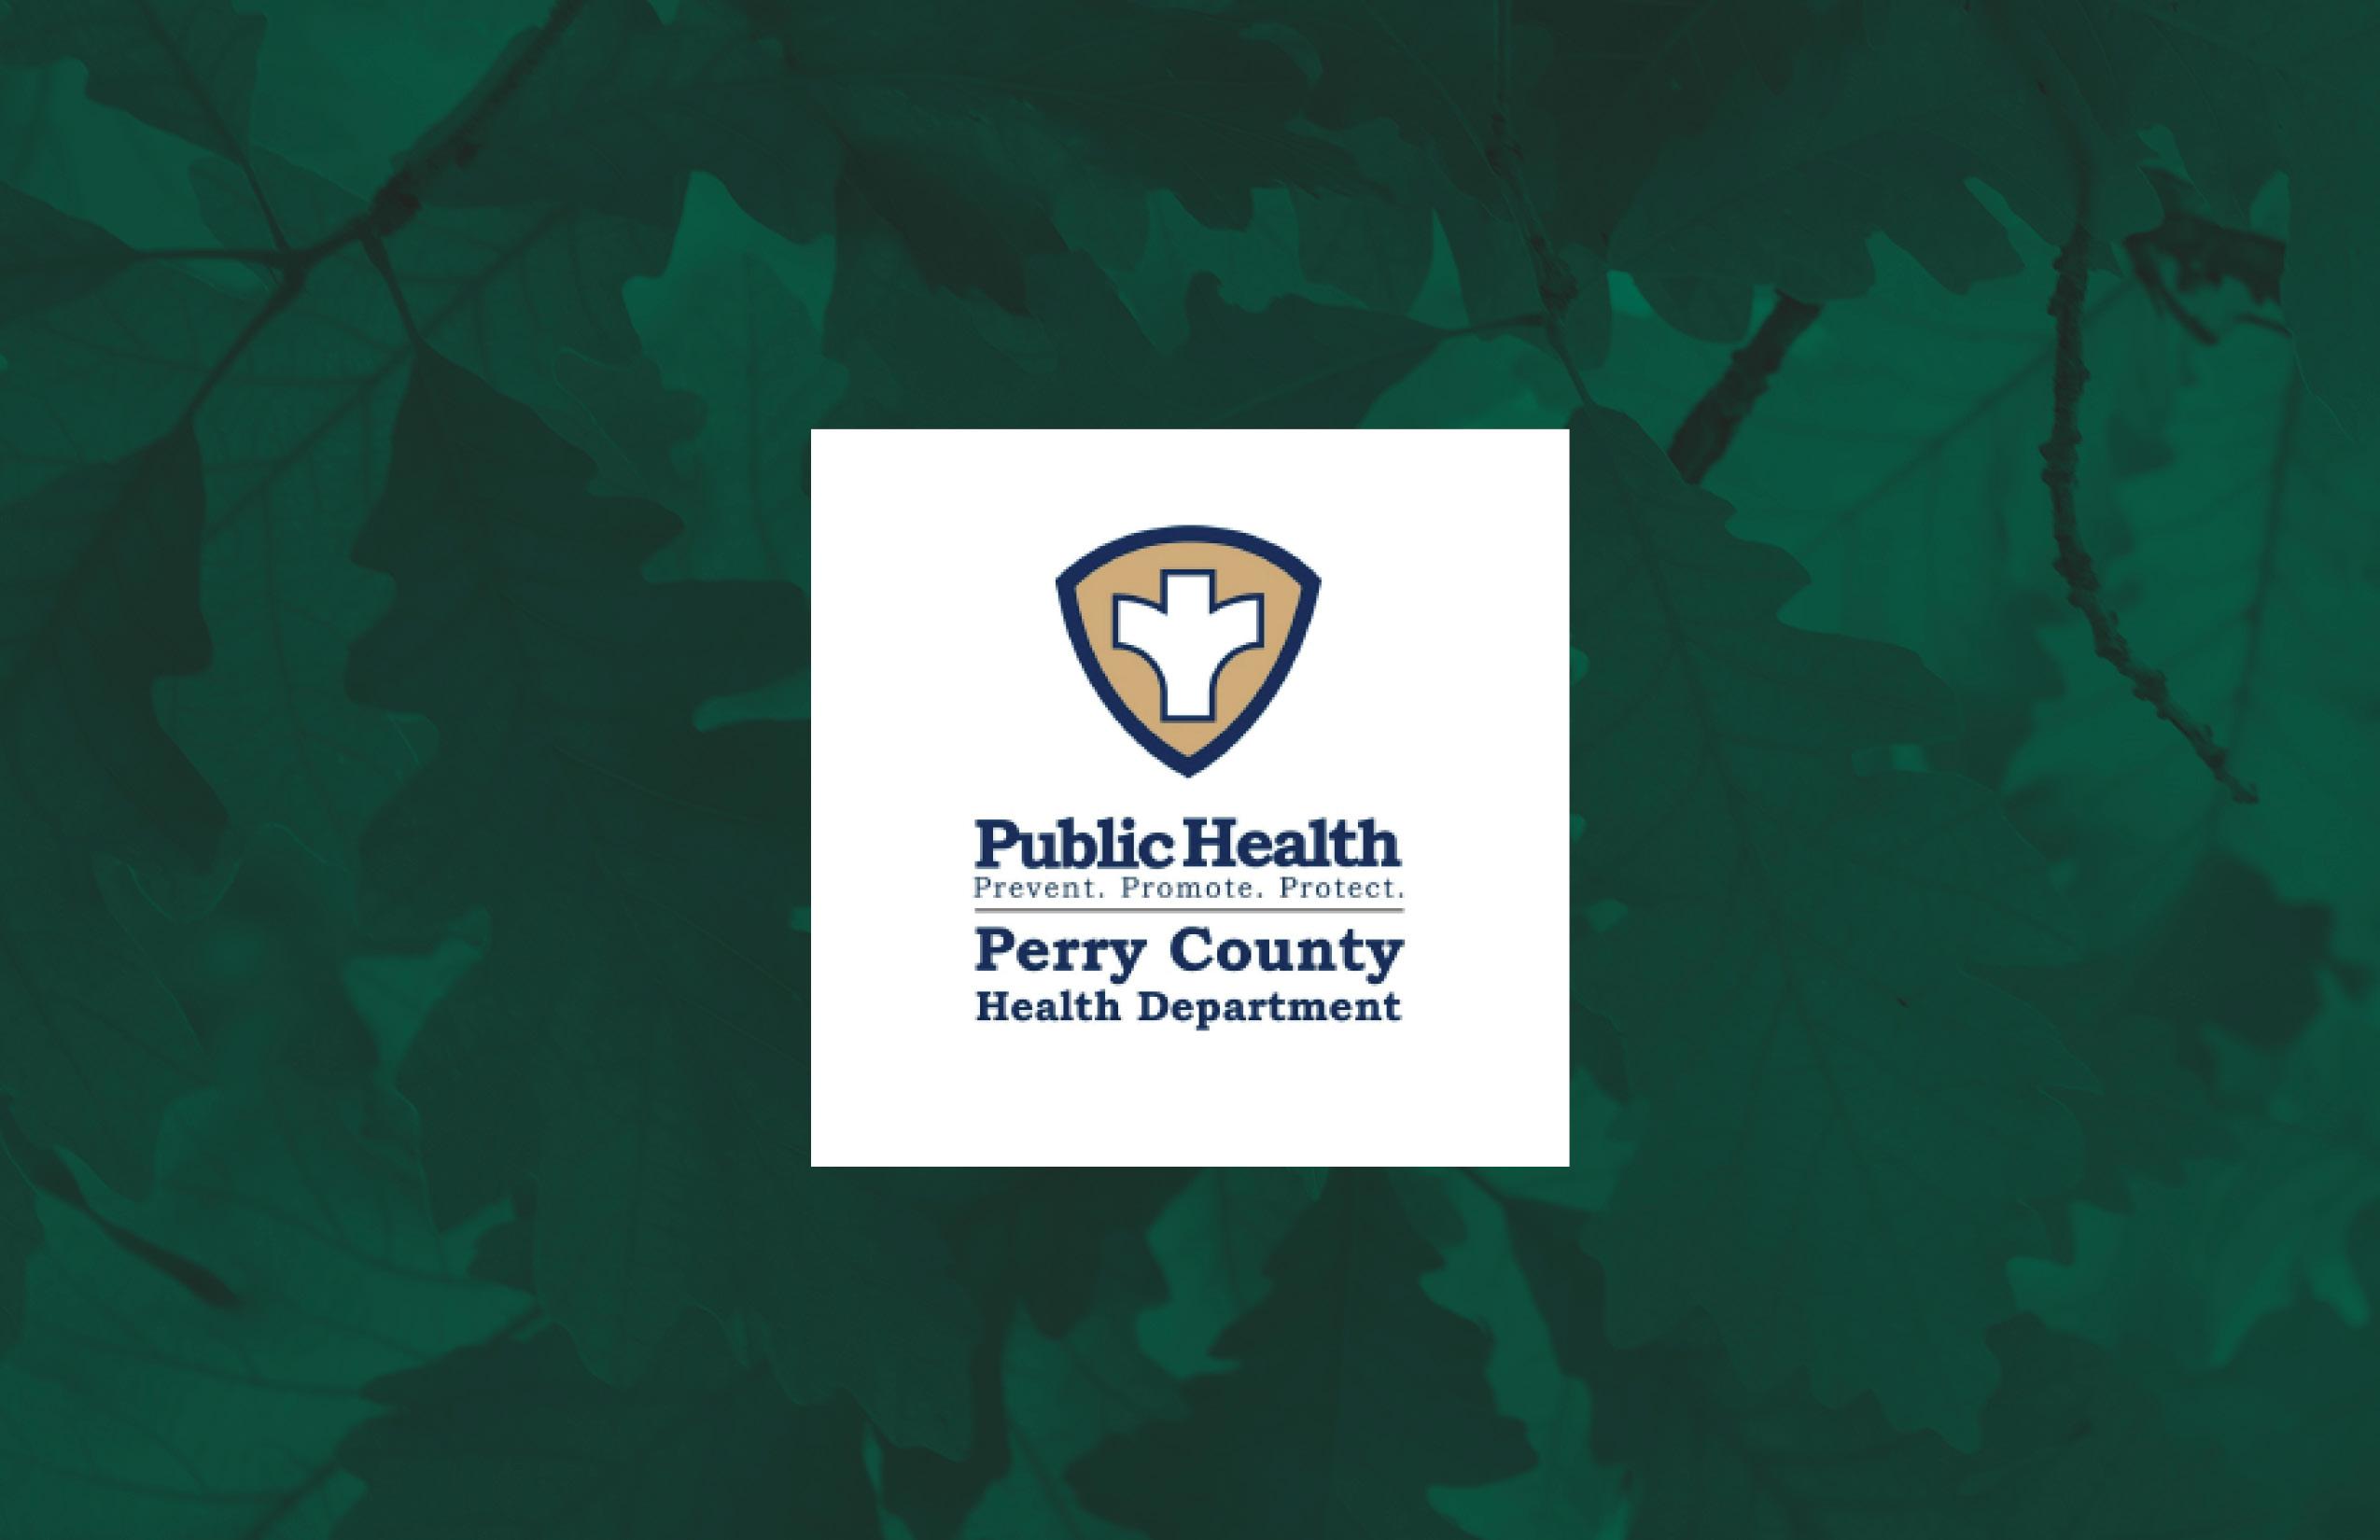 Perry County Health Department Logo in a white square surrounded by green leaf texture